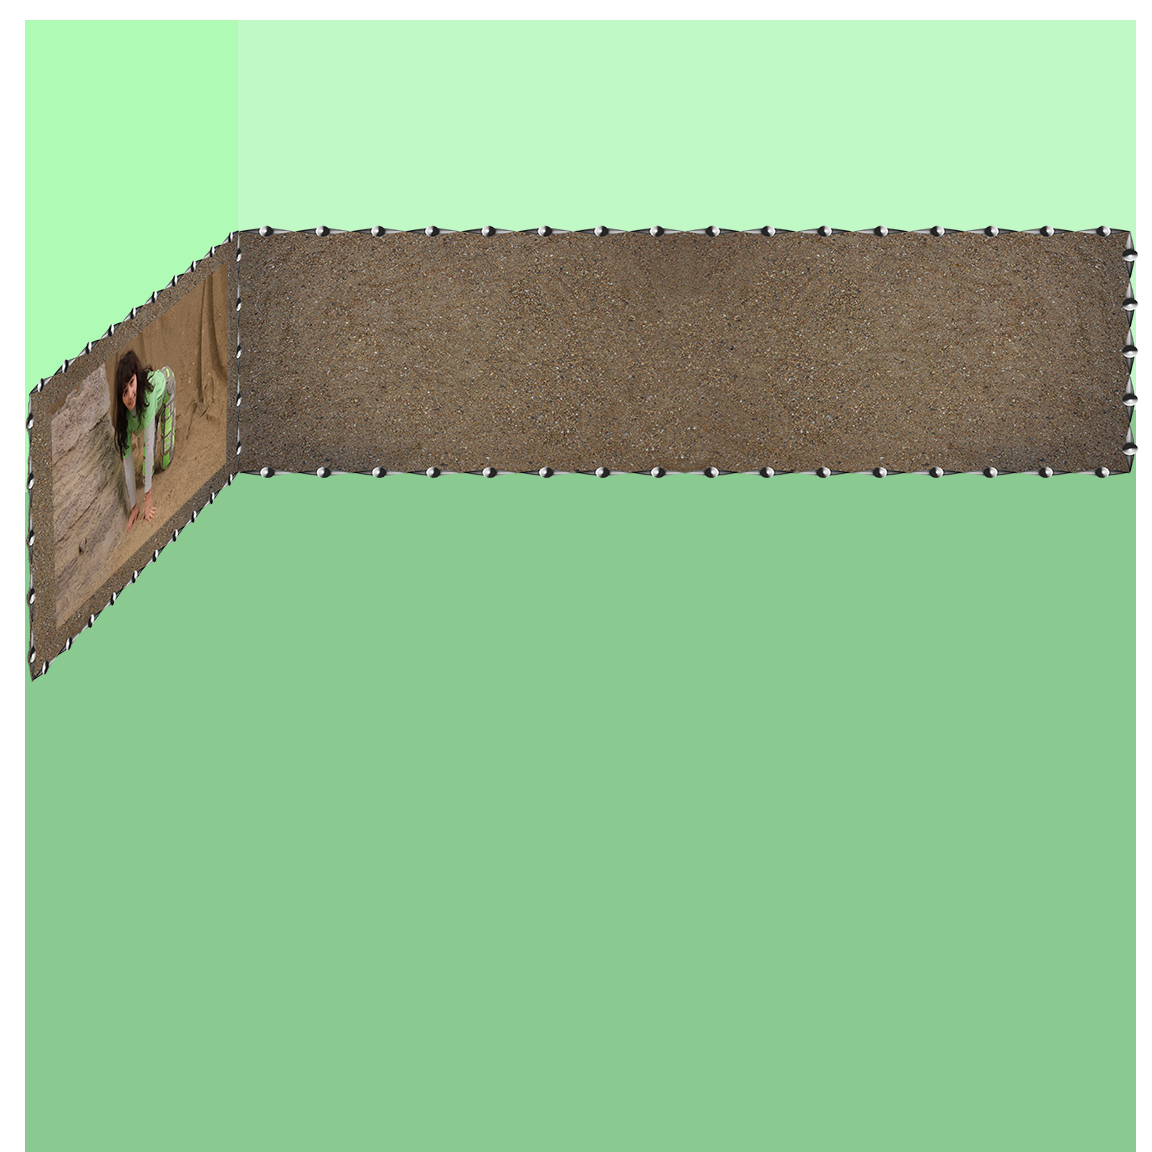 Virtual version of the Everyworm Deserves a Mansion installation. Two floating sand walls with three projections on them. The sand walls are framed with studded metal diamond. The floor and ceiling is light green, painted in photoshop digitally.